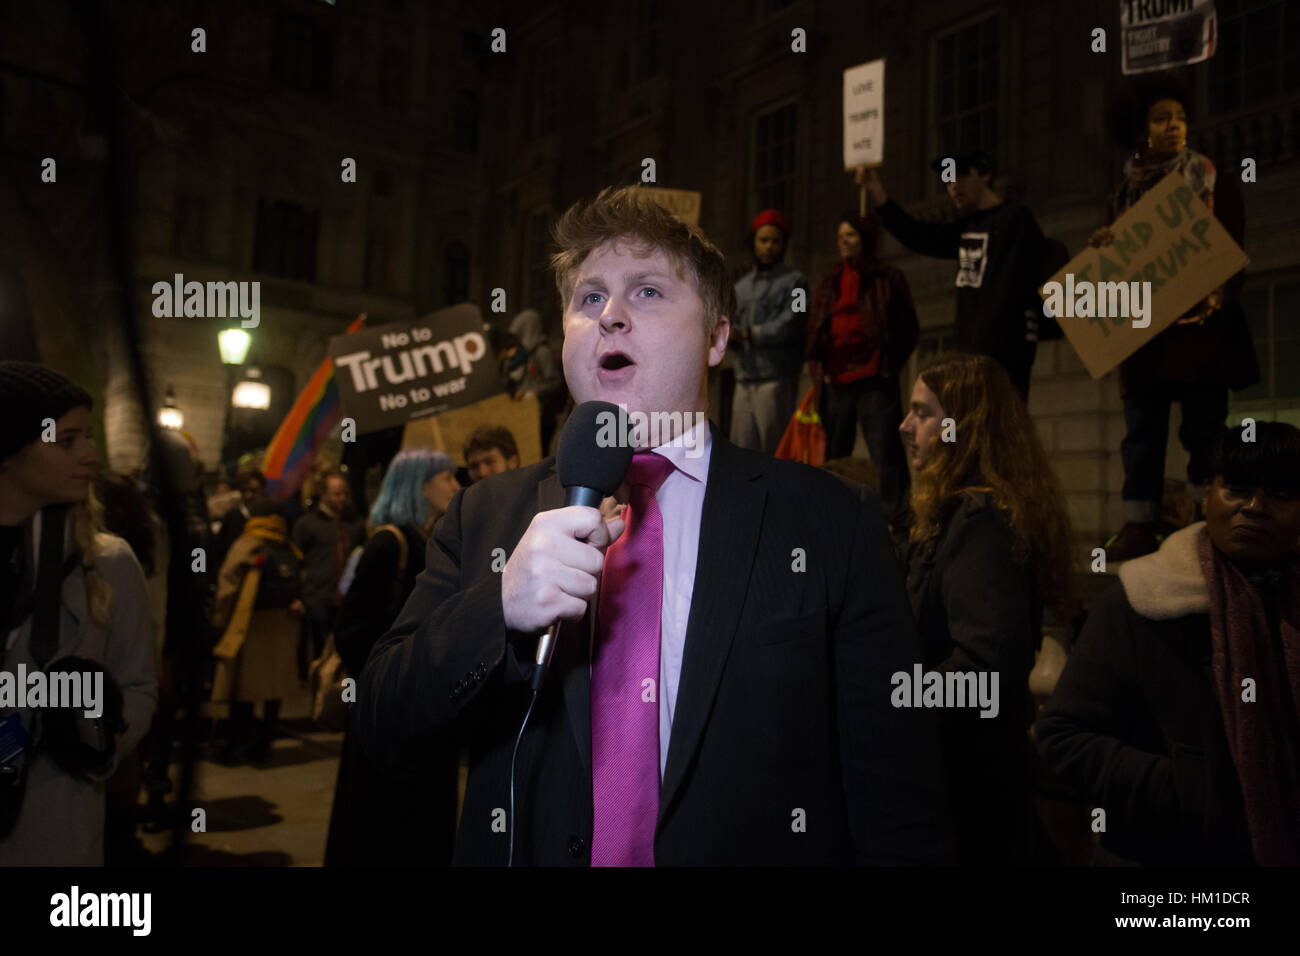 London, UK. 30th Jan, 2017. Political Journalist - Andre Walker shows up in support of Trump at the Emergency Demo against Trump's Muslim Ban. Credit: Aimvphotography/Alamy Live News Stock Photo